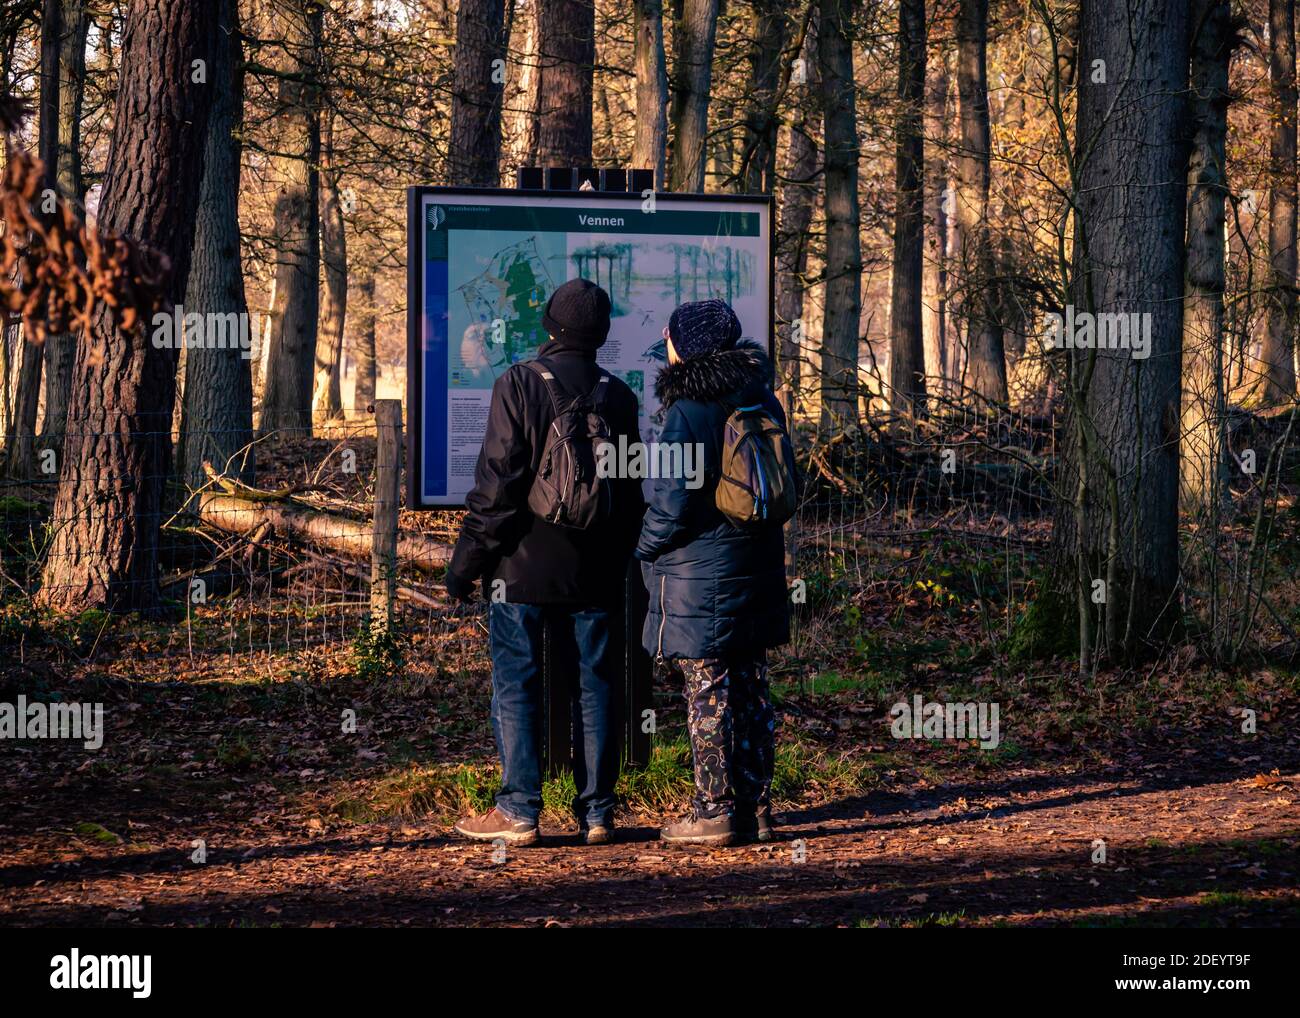 BORGER, THE NETHERLANDS NOVEMBER 25, 2020: Two people with small backpacks, wearing thick winter coats and warm woolen hats looking at the information Stock Photo